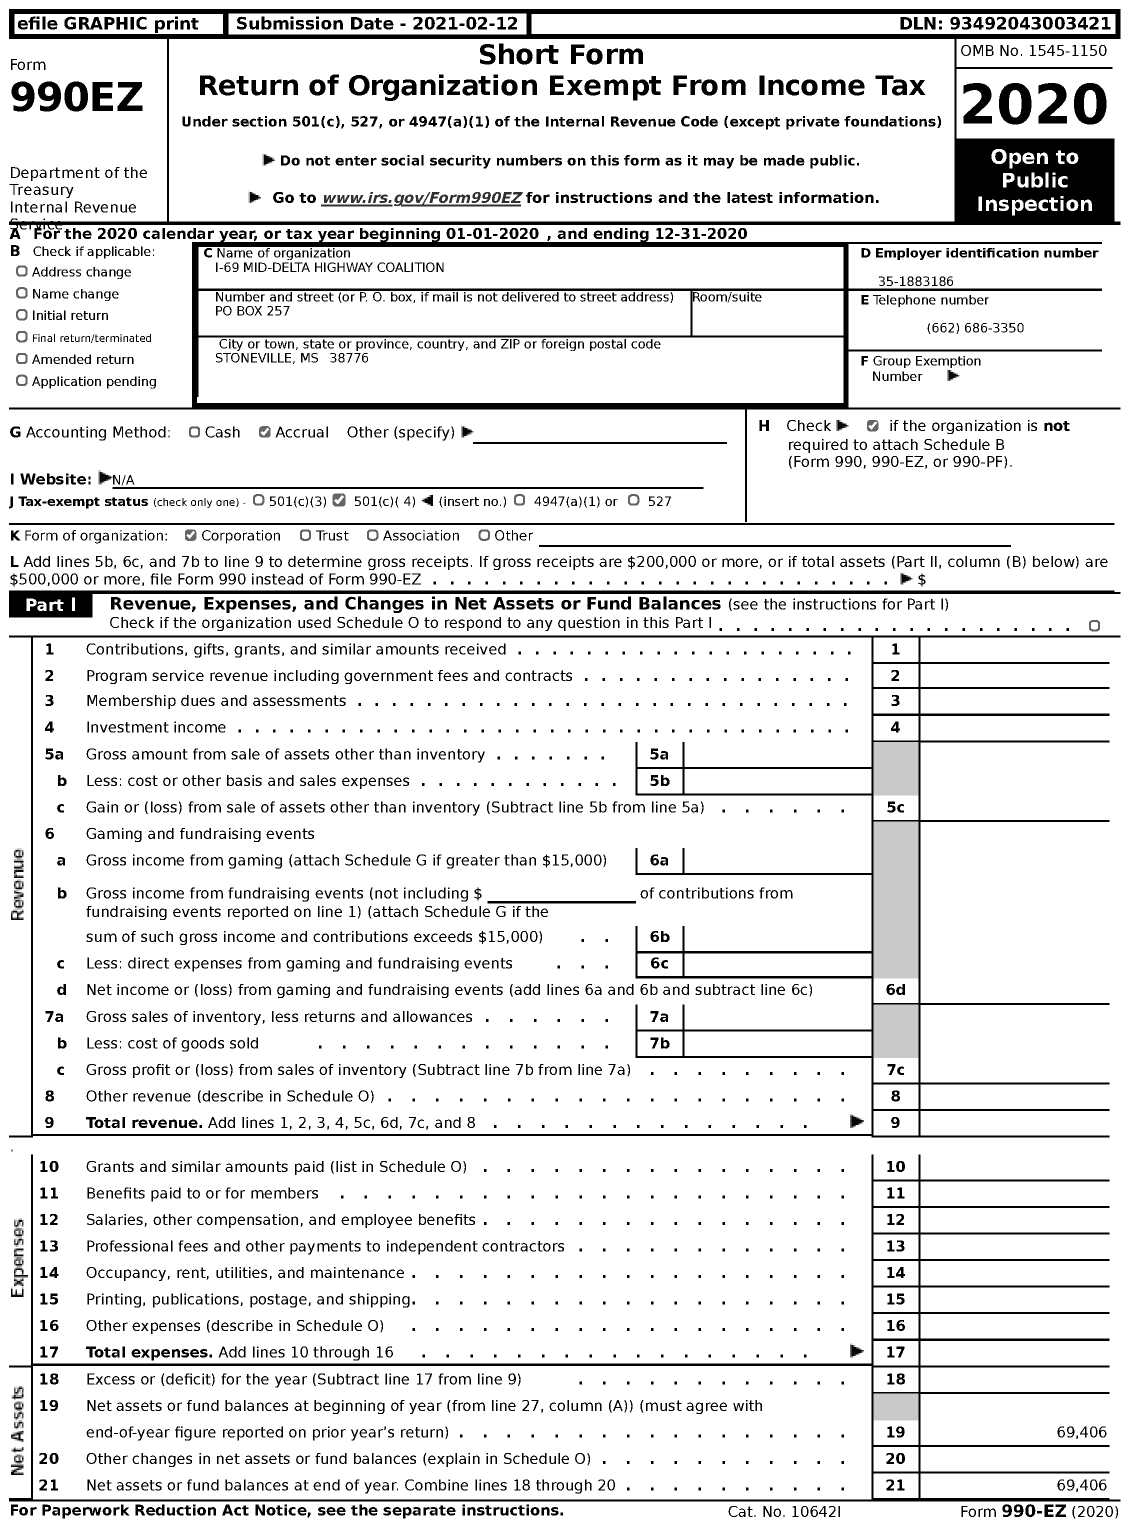 Image of first page of 2020 Form 990EZ for I-69 Mid-Delta Highway Coalition